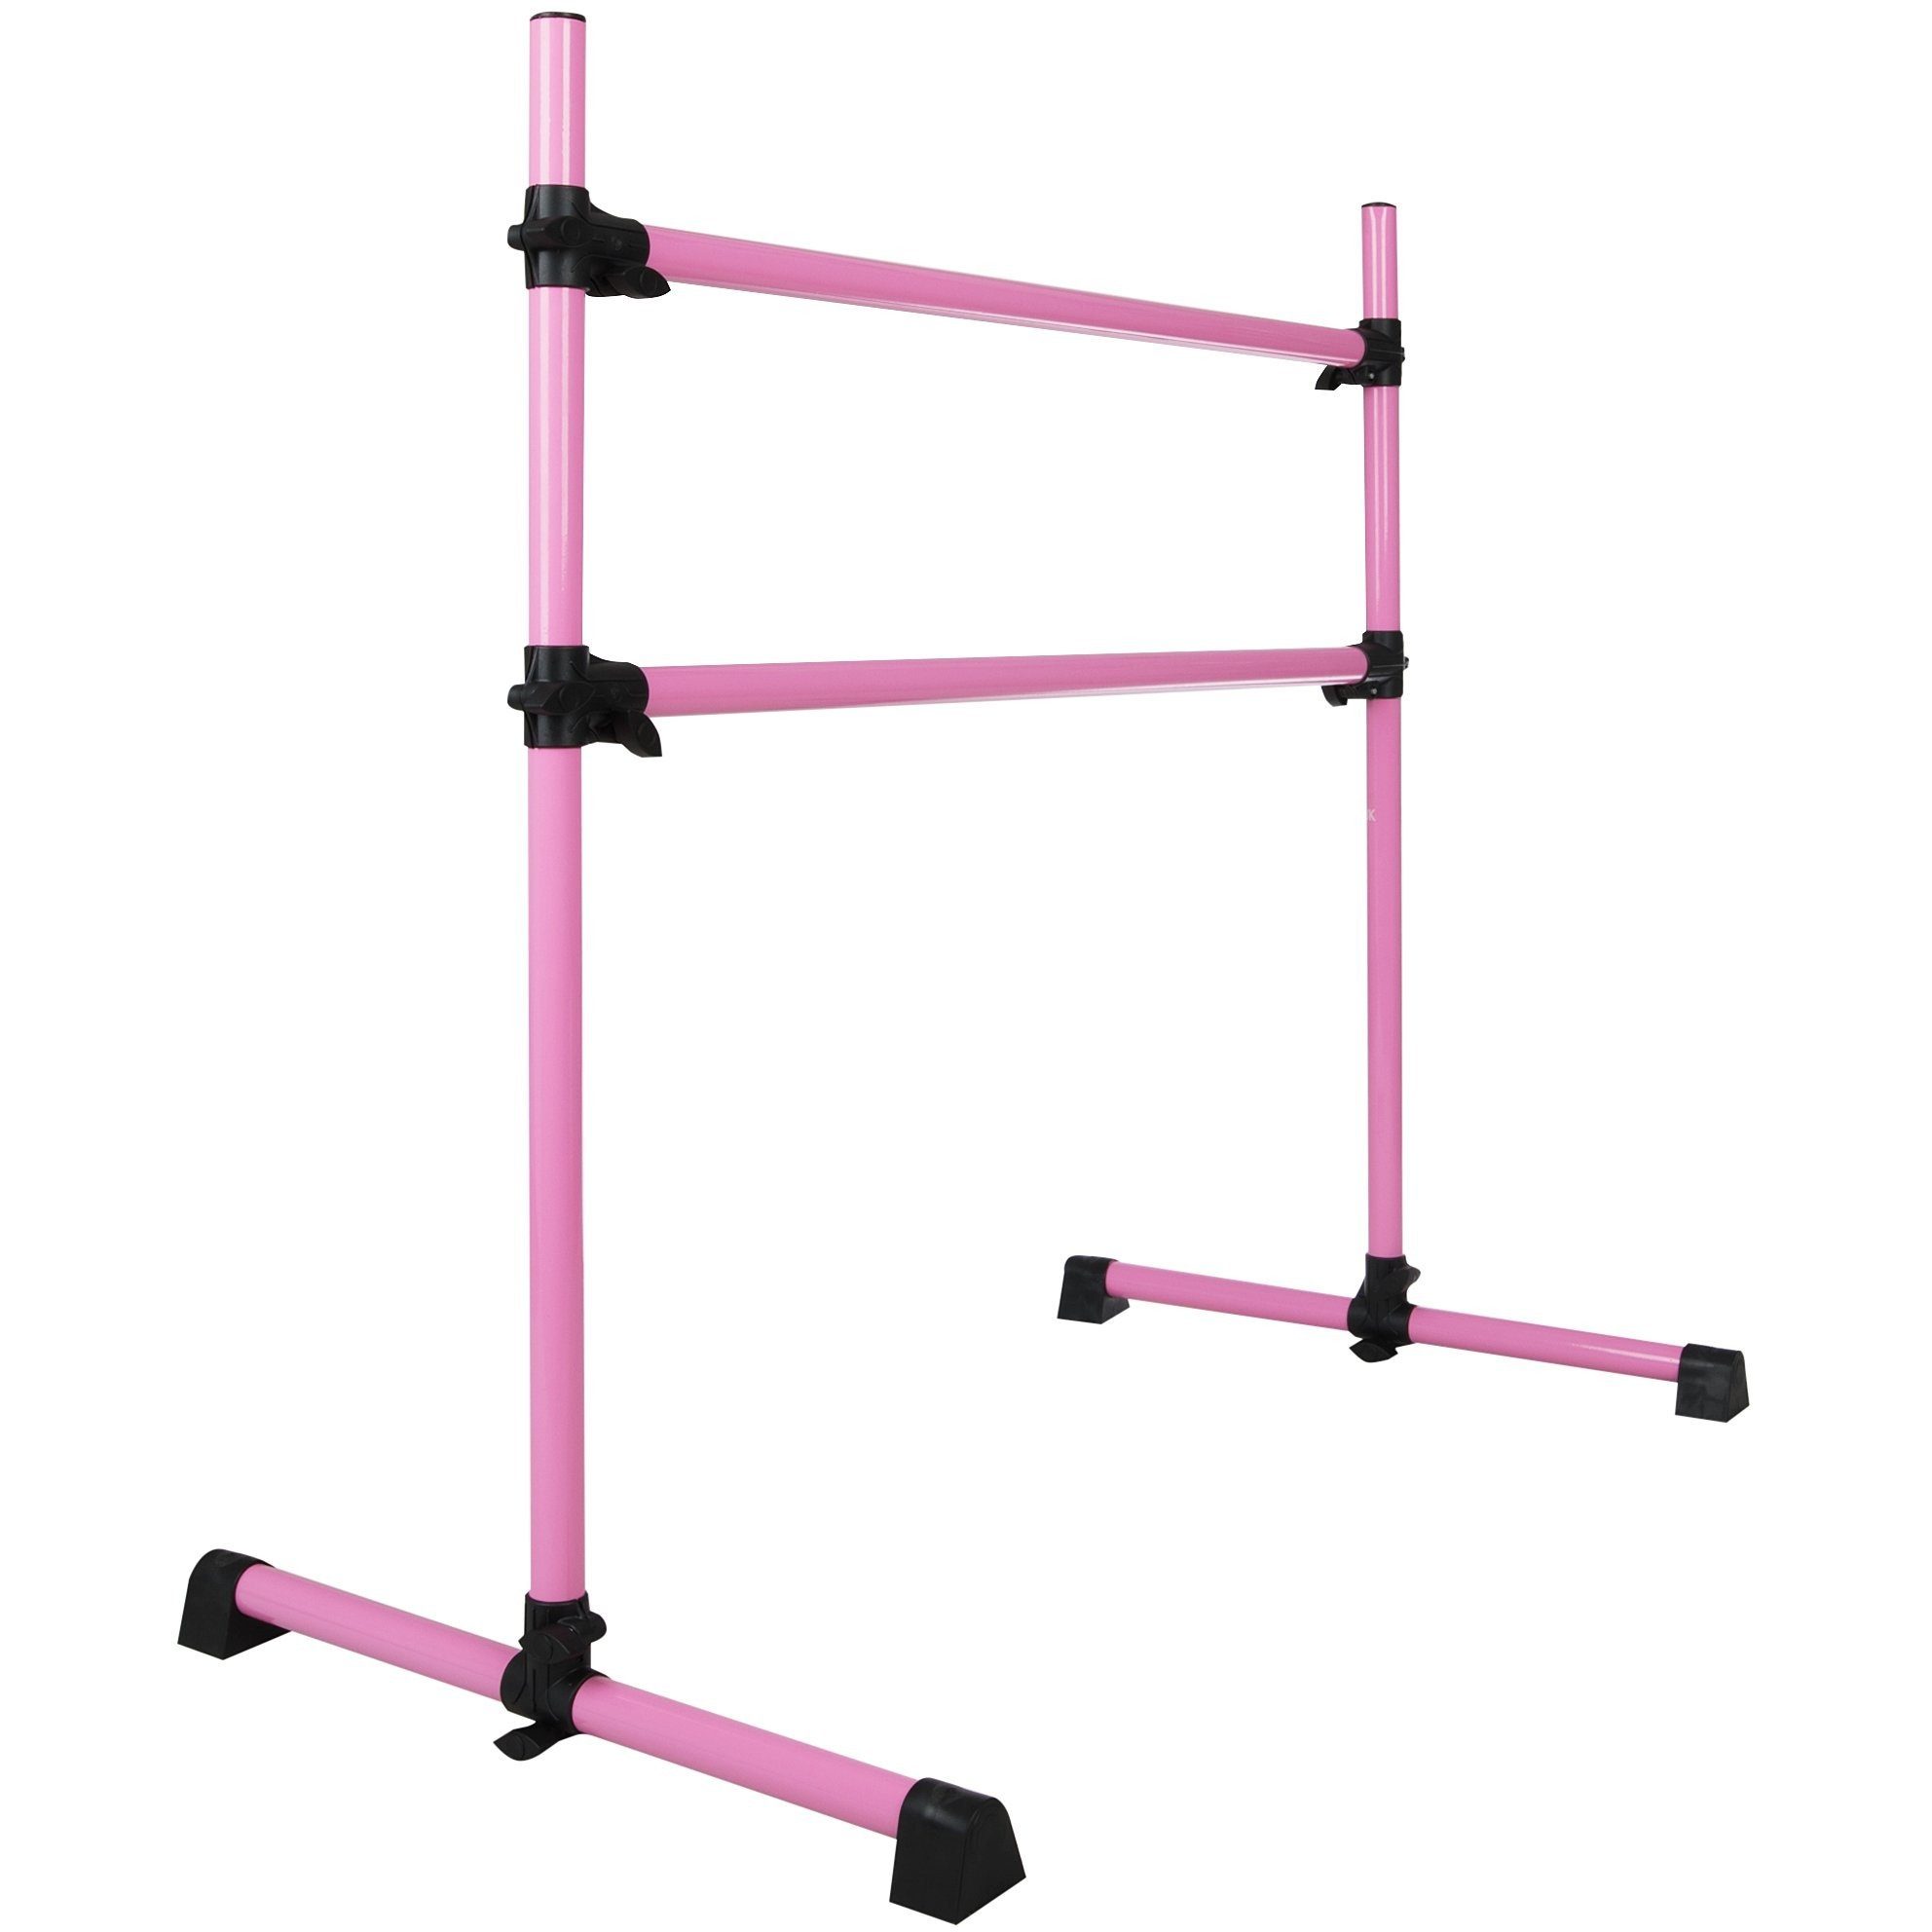 Freestanding and portable Ballet / stretch Barre - Cannons UK